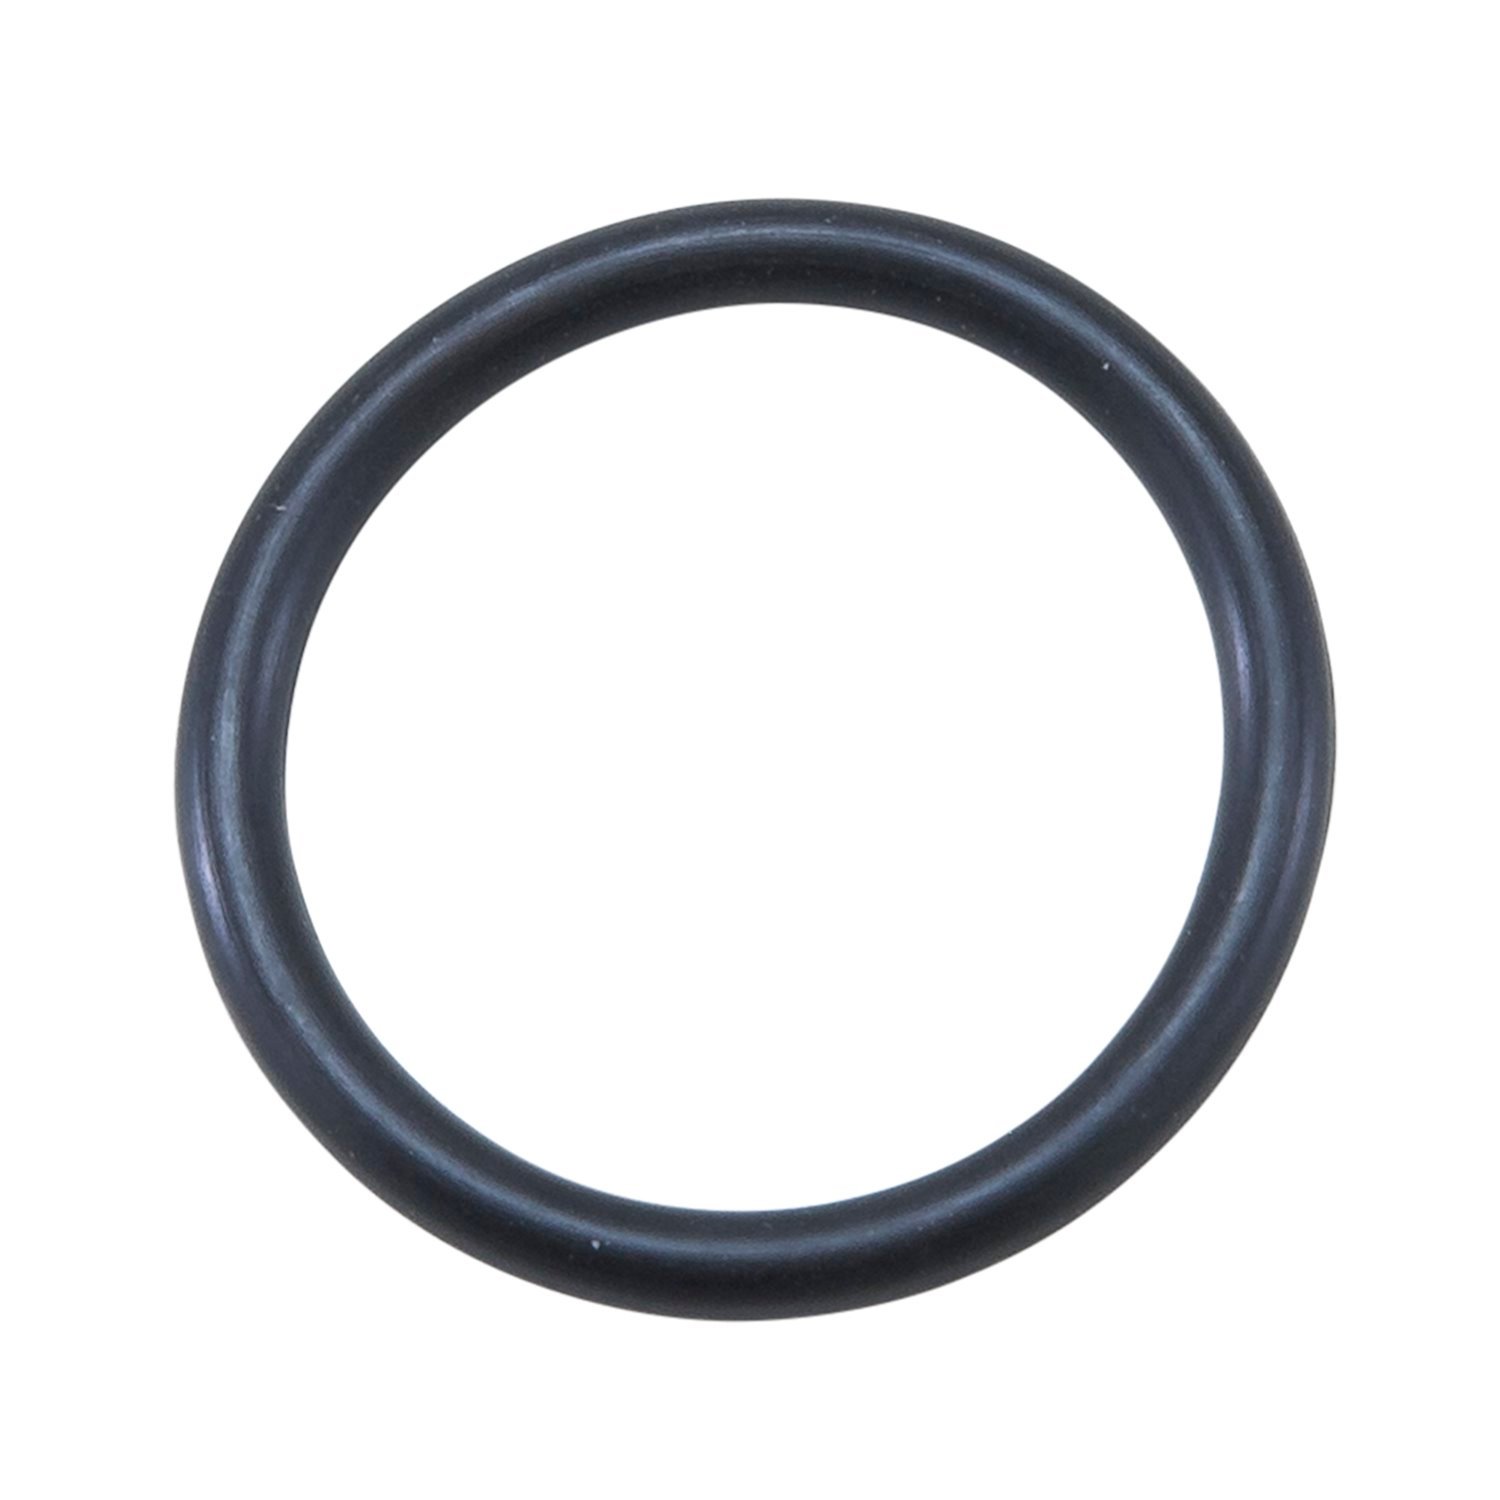 Axle O-Ring For 8 in. Chrysler Ifs.